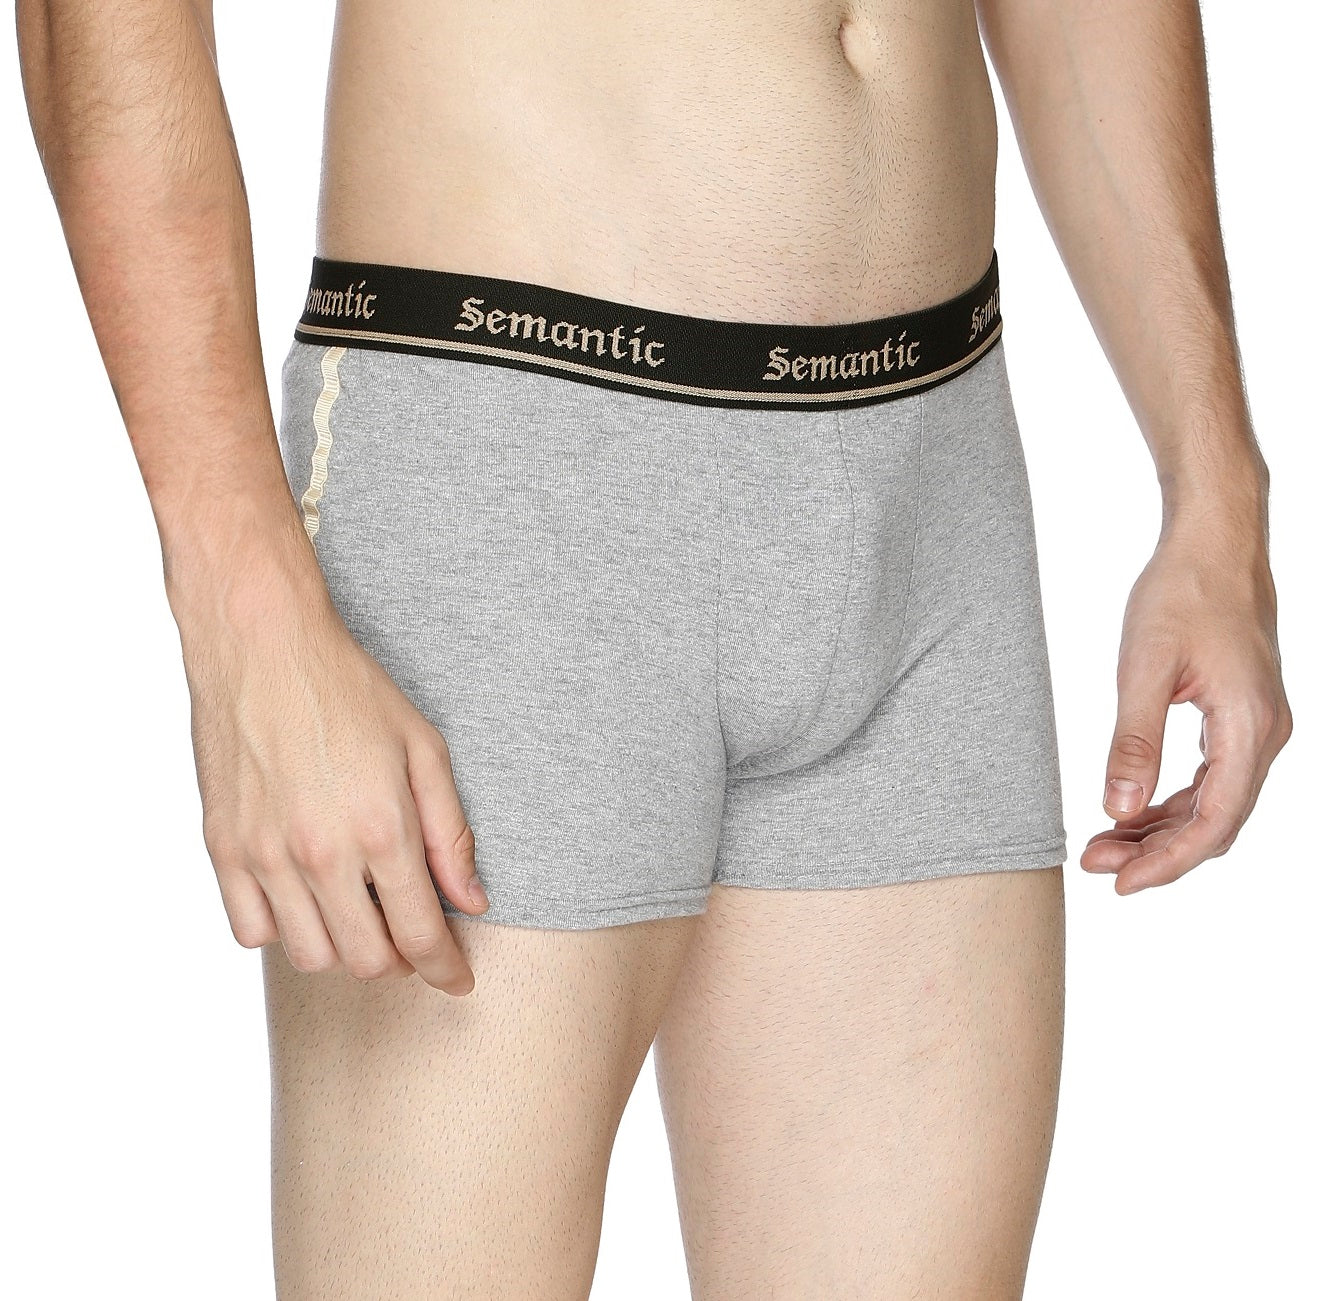 Semantic Cotton Trunks - With Stylish Tape